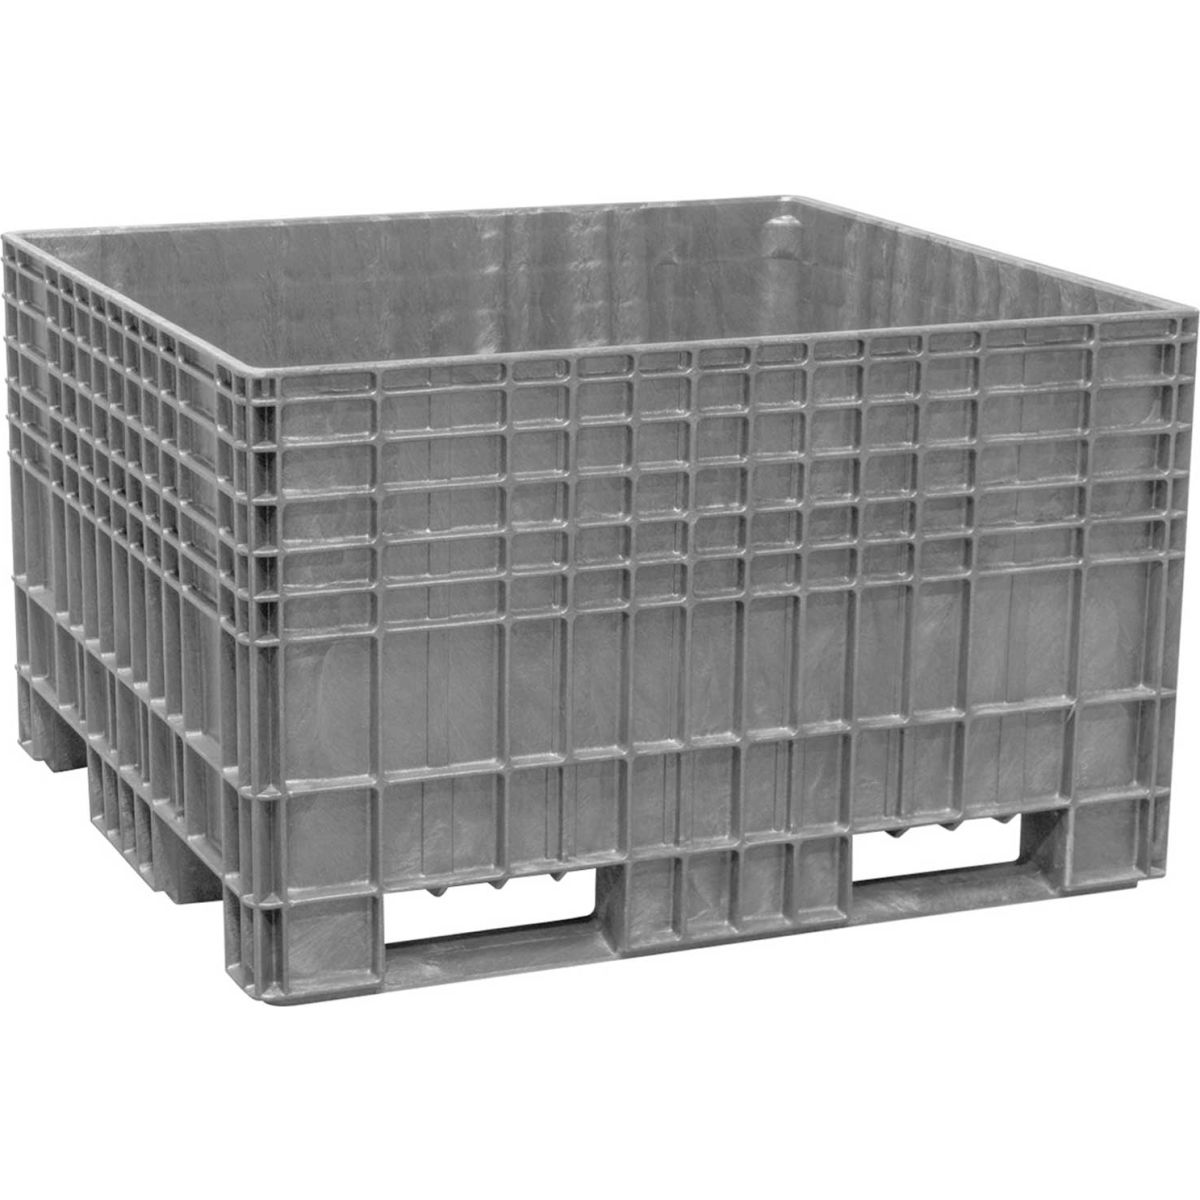 Picture of Akro-Mils 4733000 Buckhorn BF4844290051000 Agricultural Bulk Container - FDA Compliant - Light Gray - 48 x 44 x 29 in.